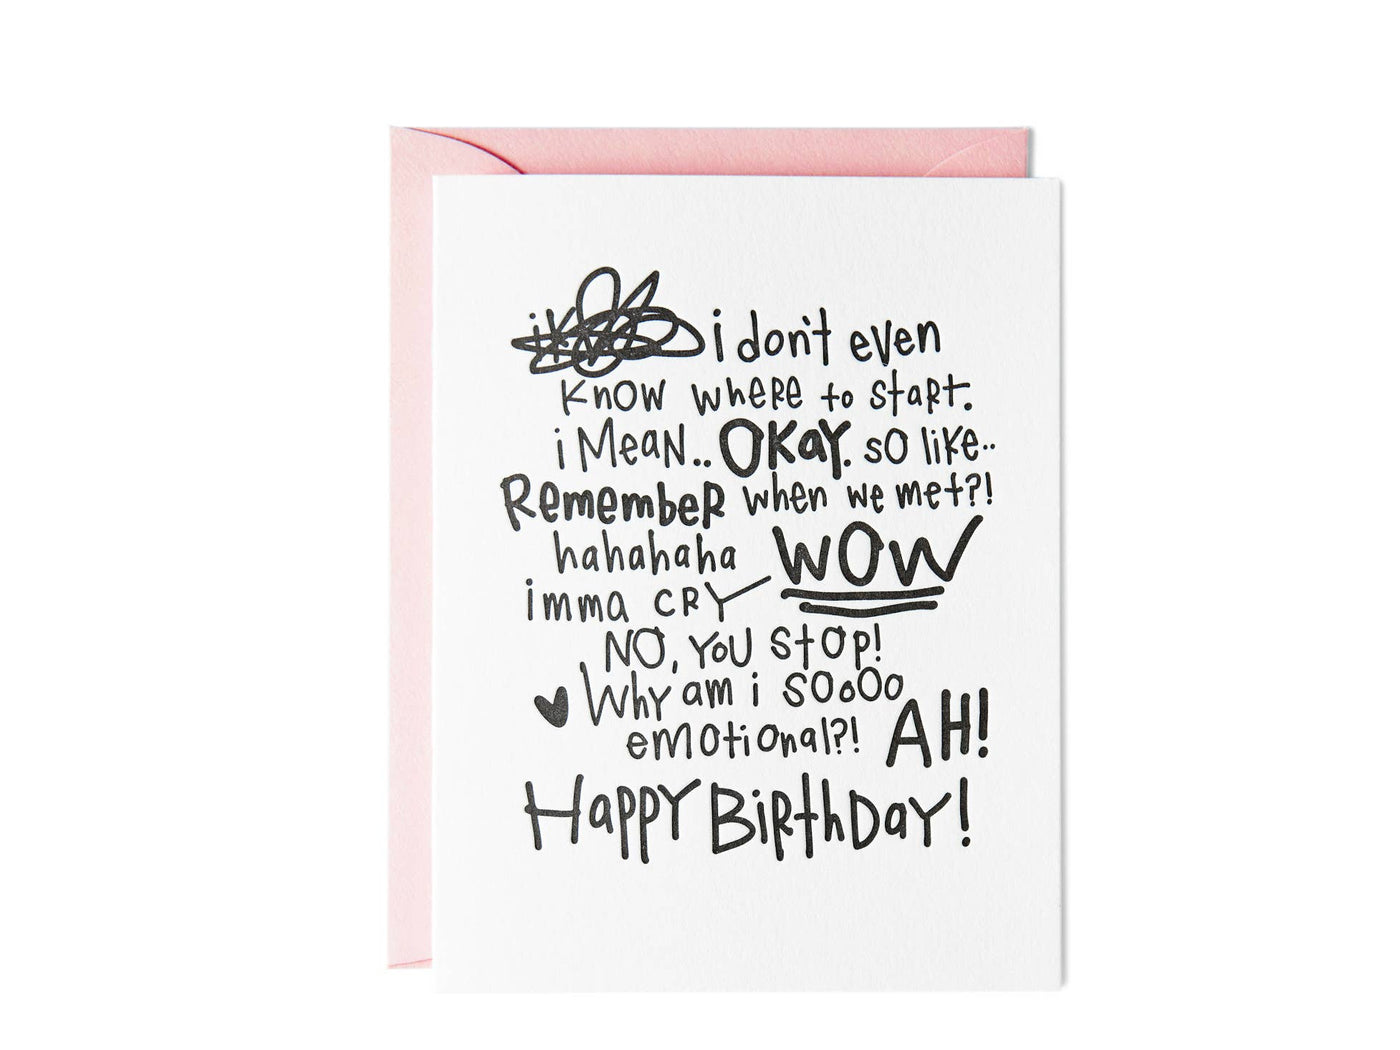 Paper Epiphanies - Imma Cry Birthday - Chelsea Leifken Collab 2.0